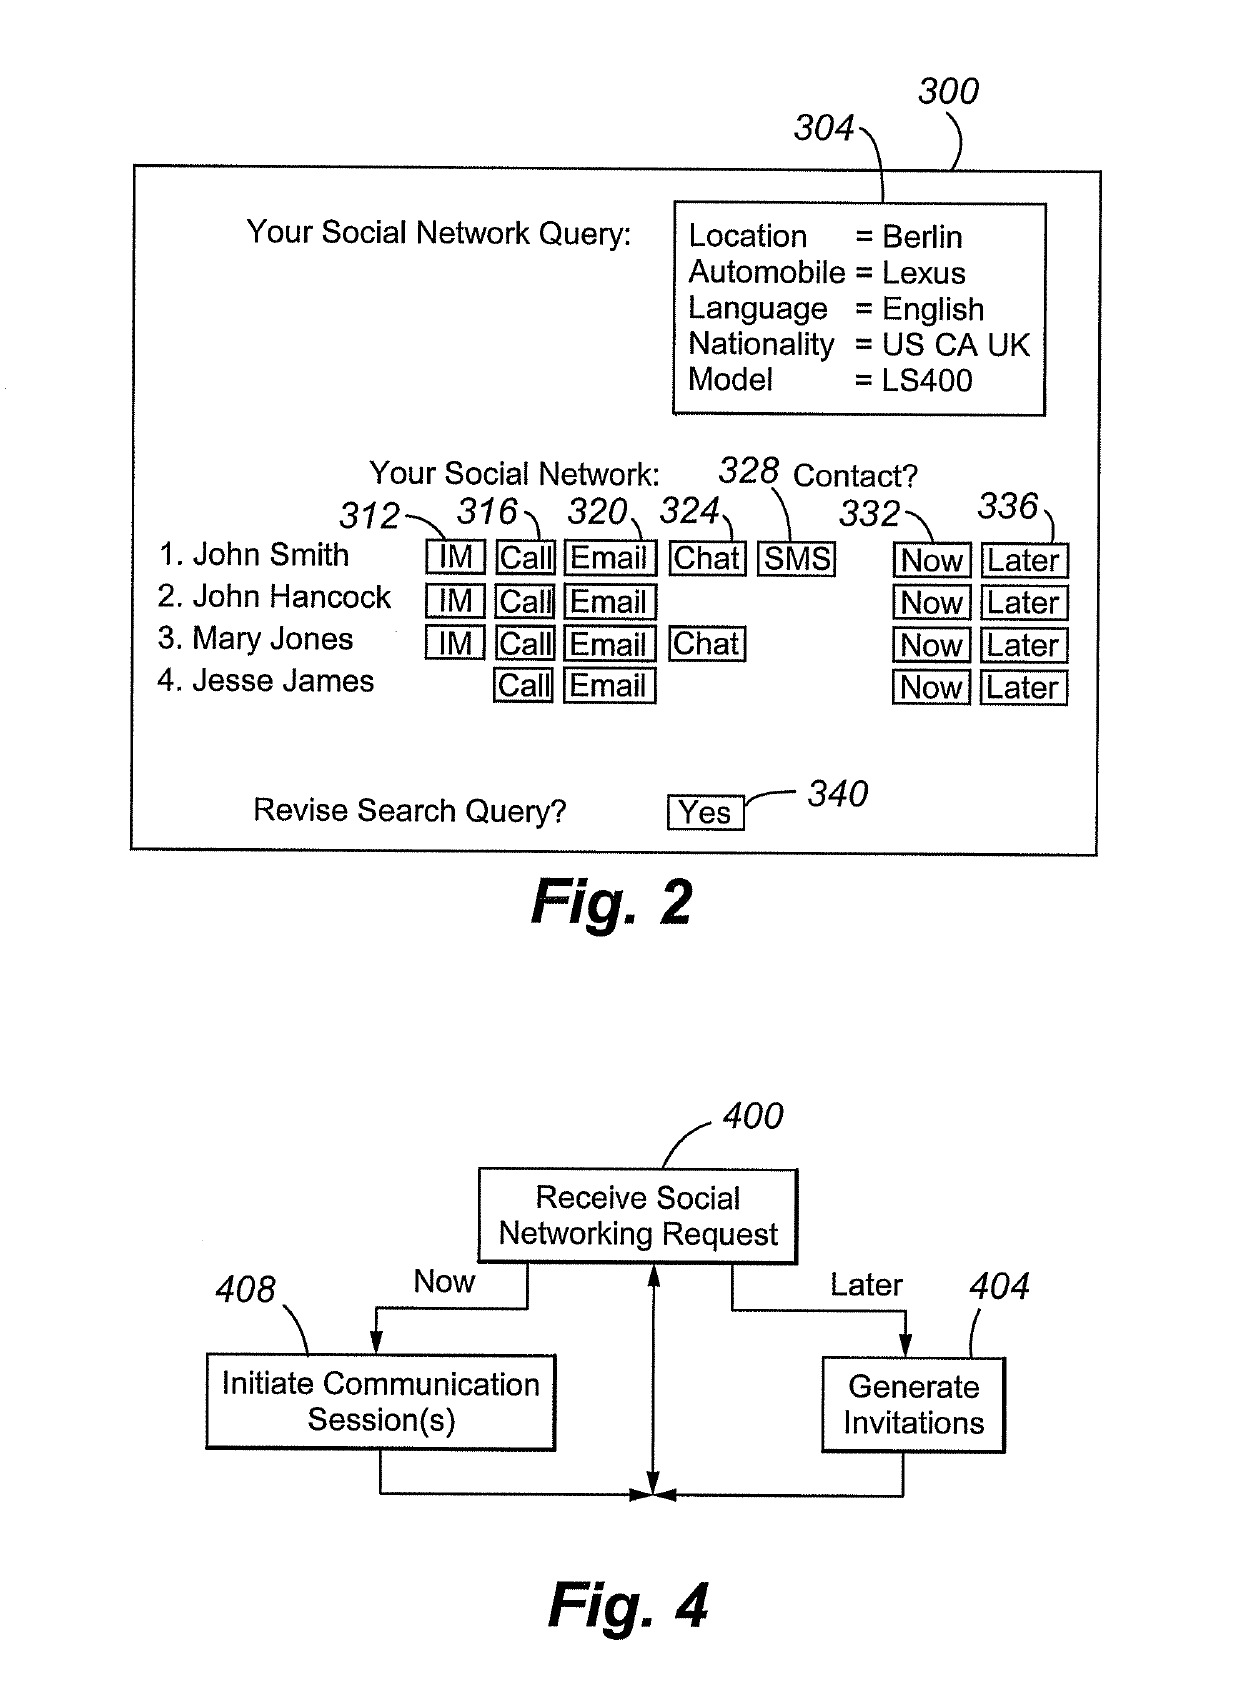 Communications-enabled dynamic social network routing utilizing presence